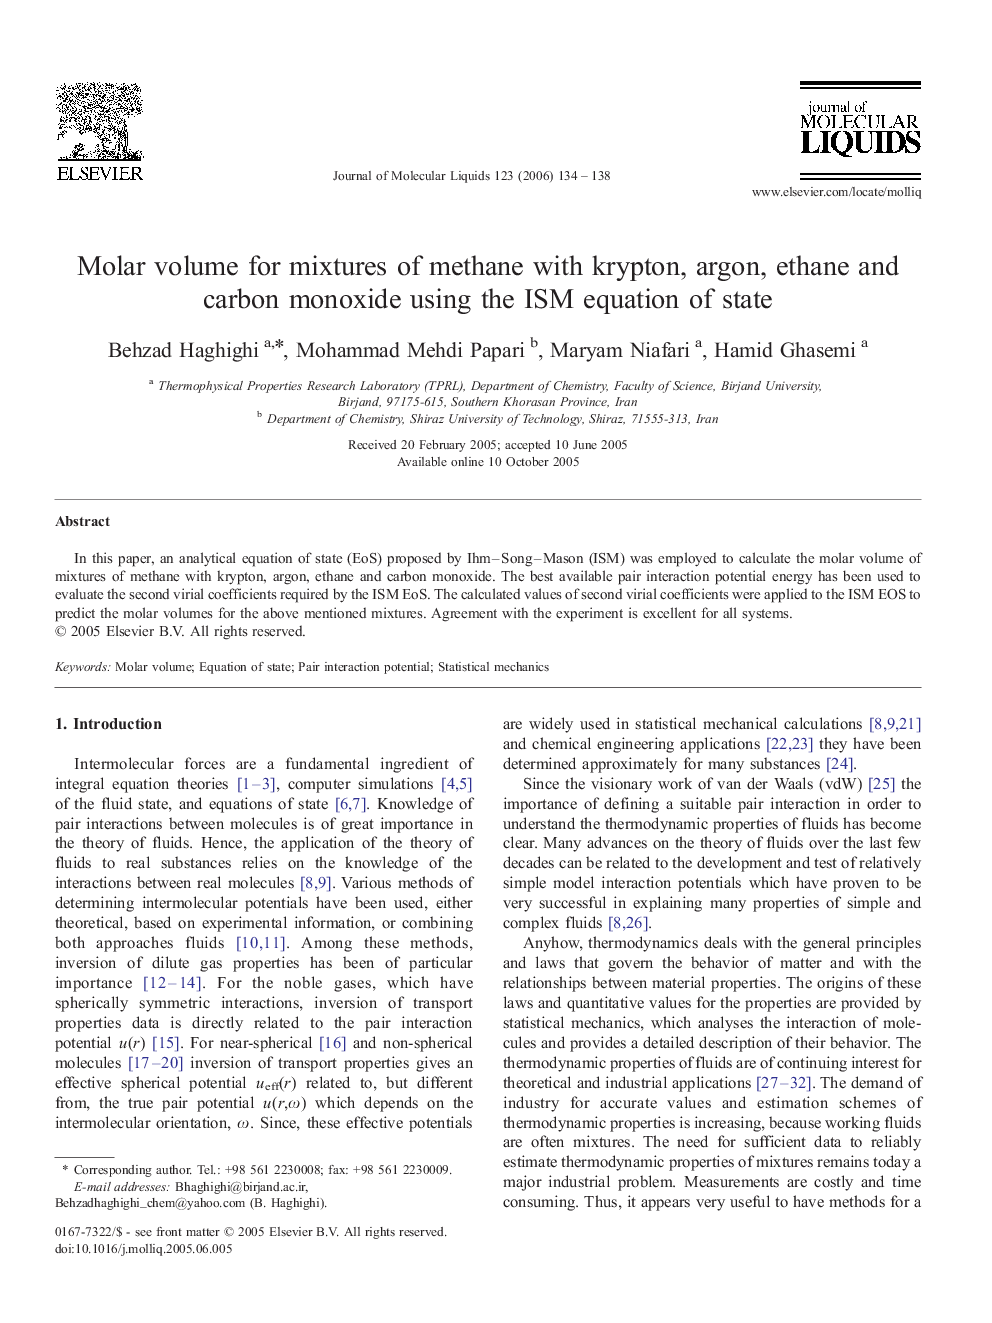 Molar volume for mixtures of methane with krypton, argon, ethane and carbon monoxide using the ISM equation of state